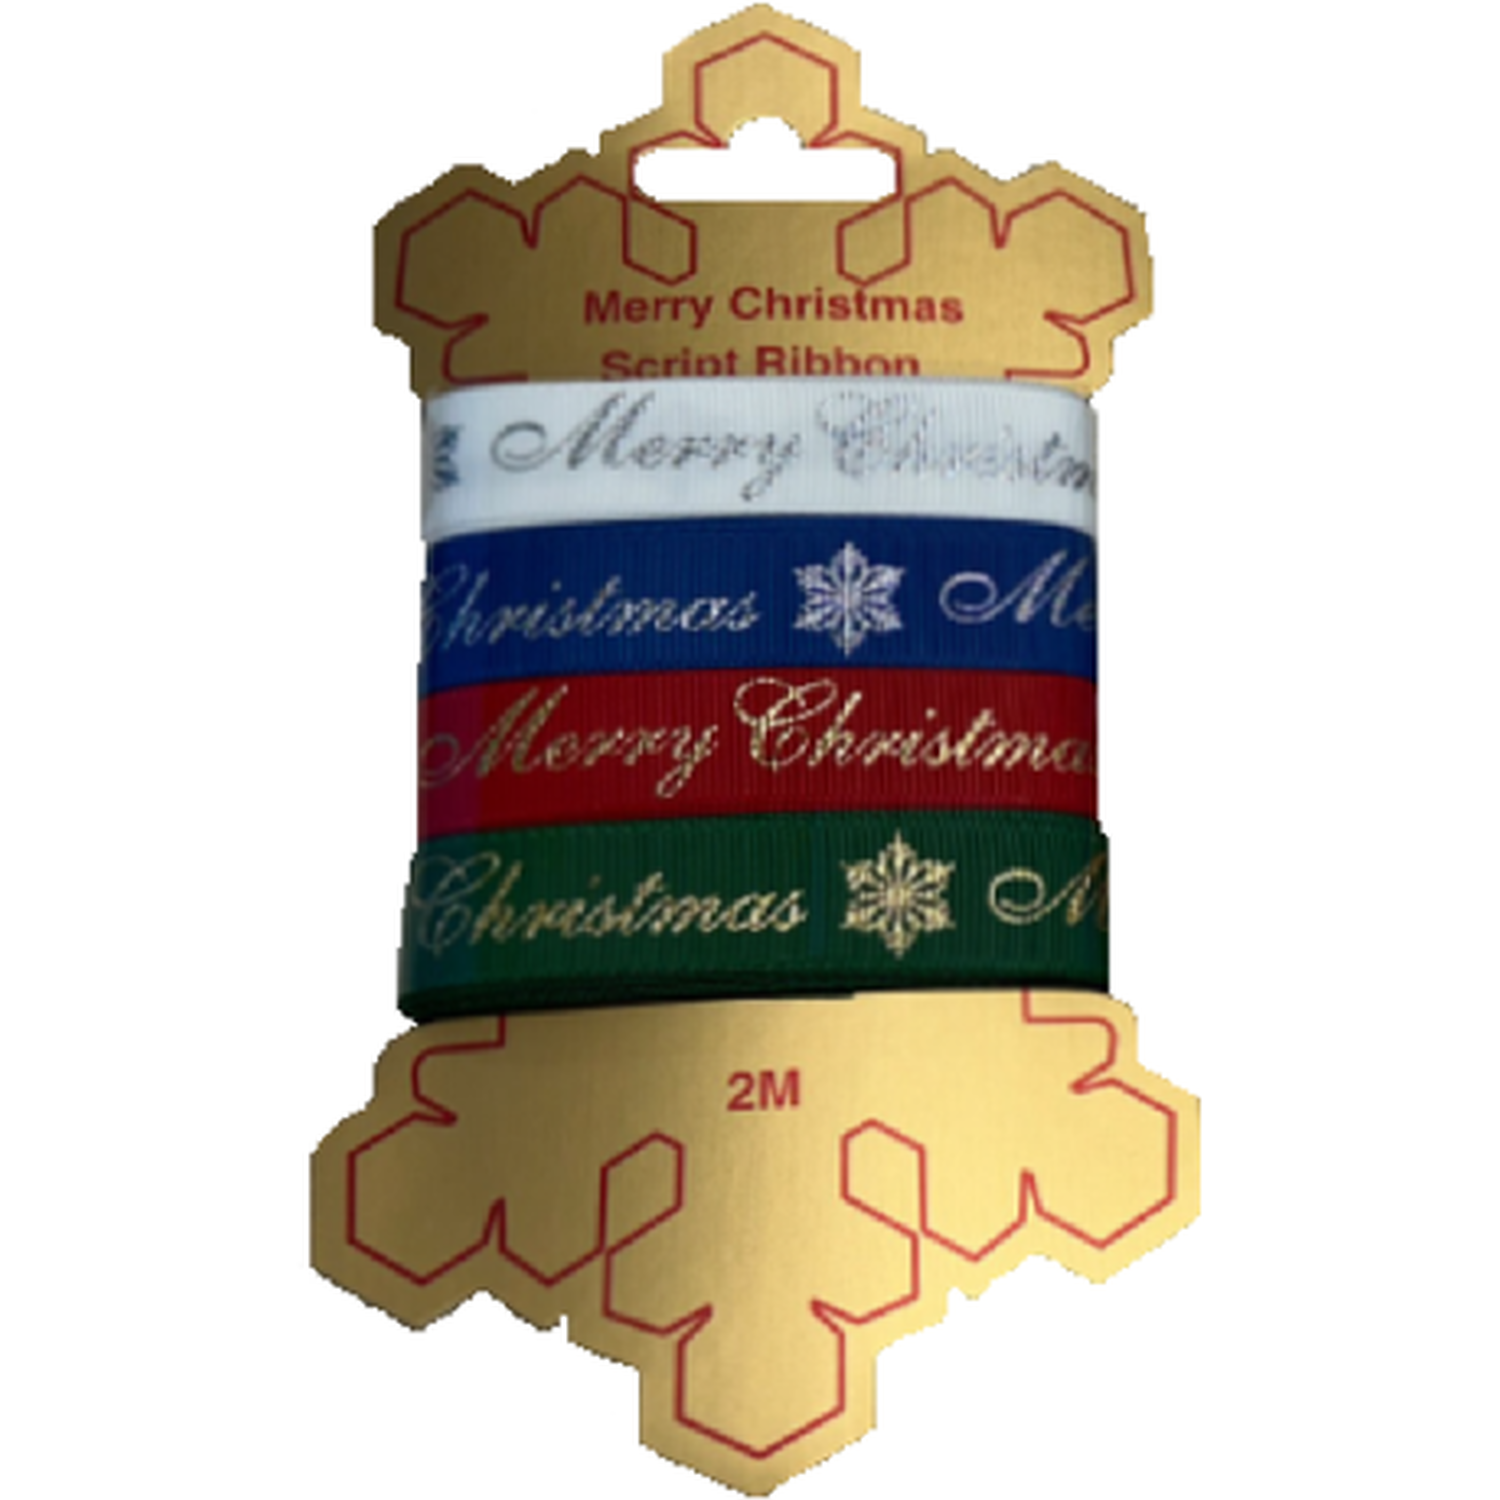 Pack of 4 Merry Christmas Script Ribbons Image